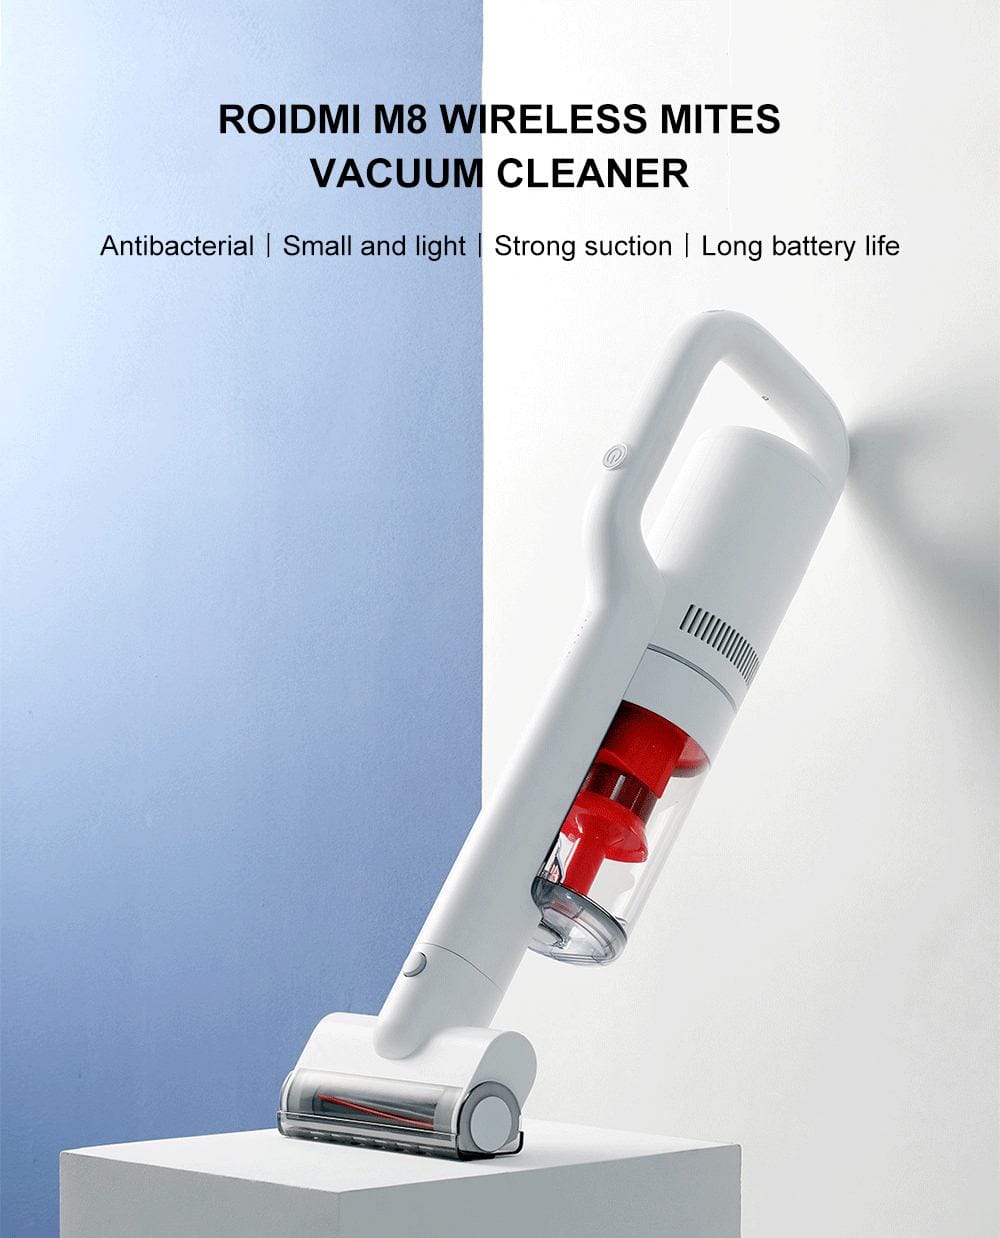 ROIDMI M8 Wireless Mites Vacuum Cleaner Xiaomi Ecosysterm Product- White